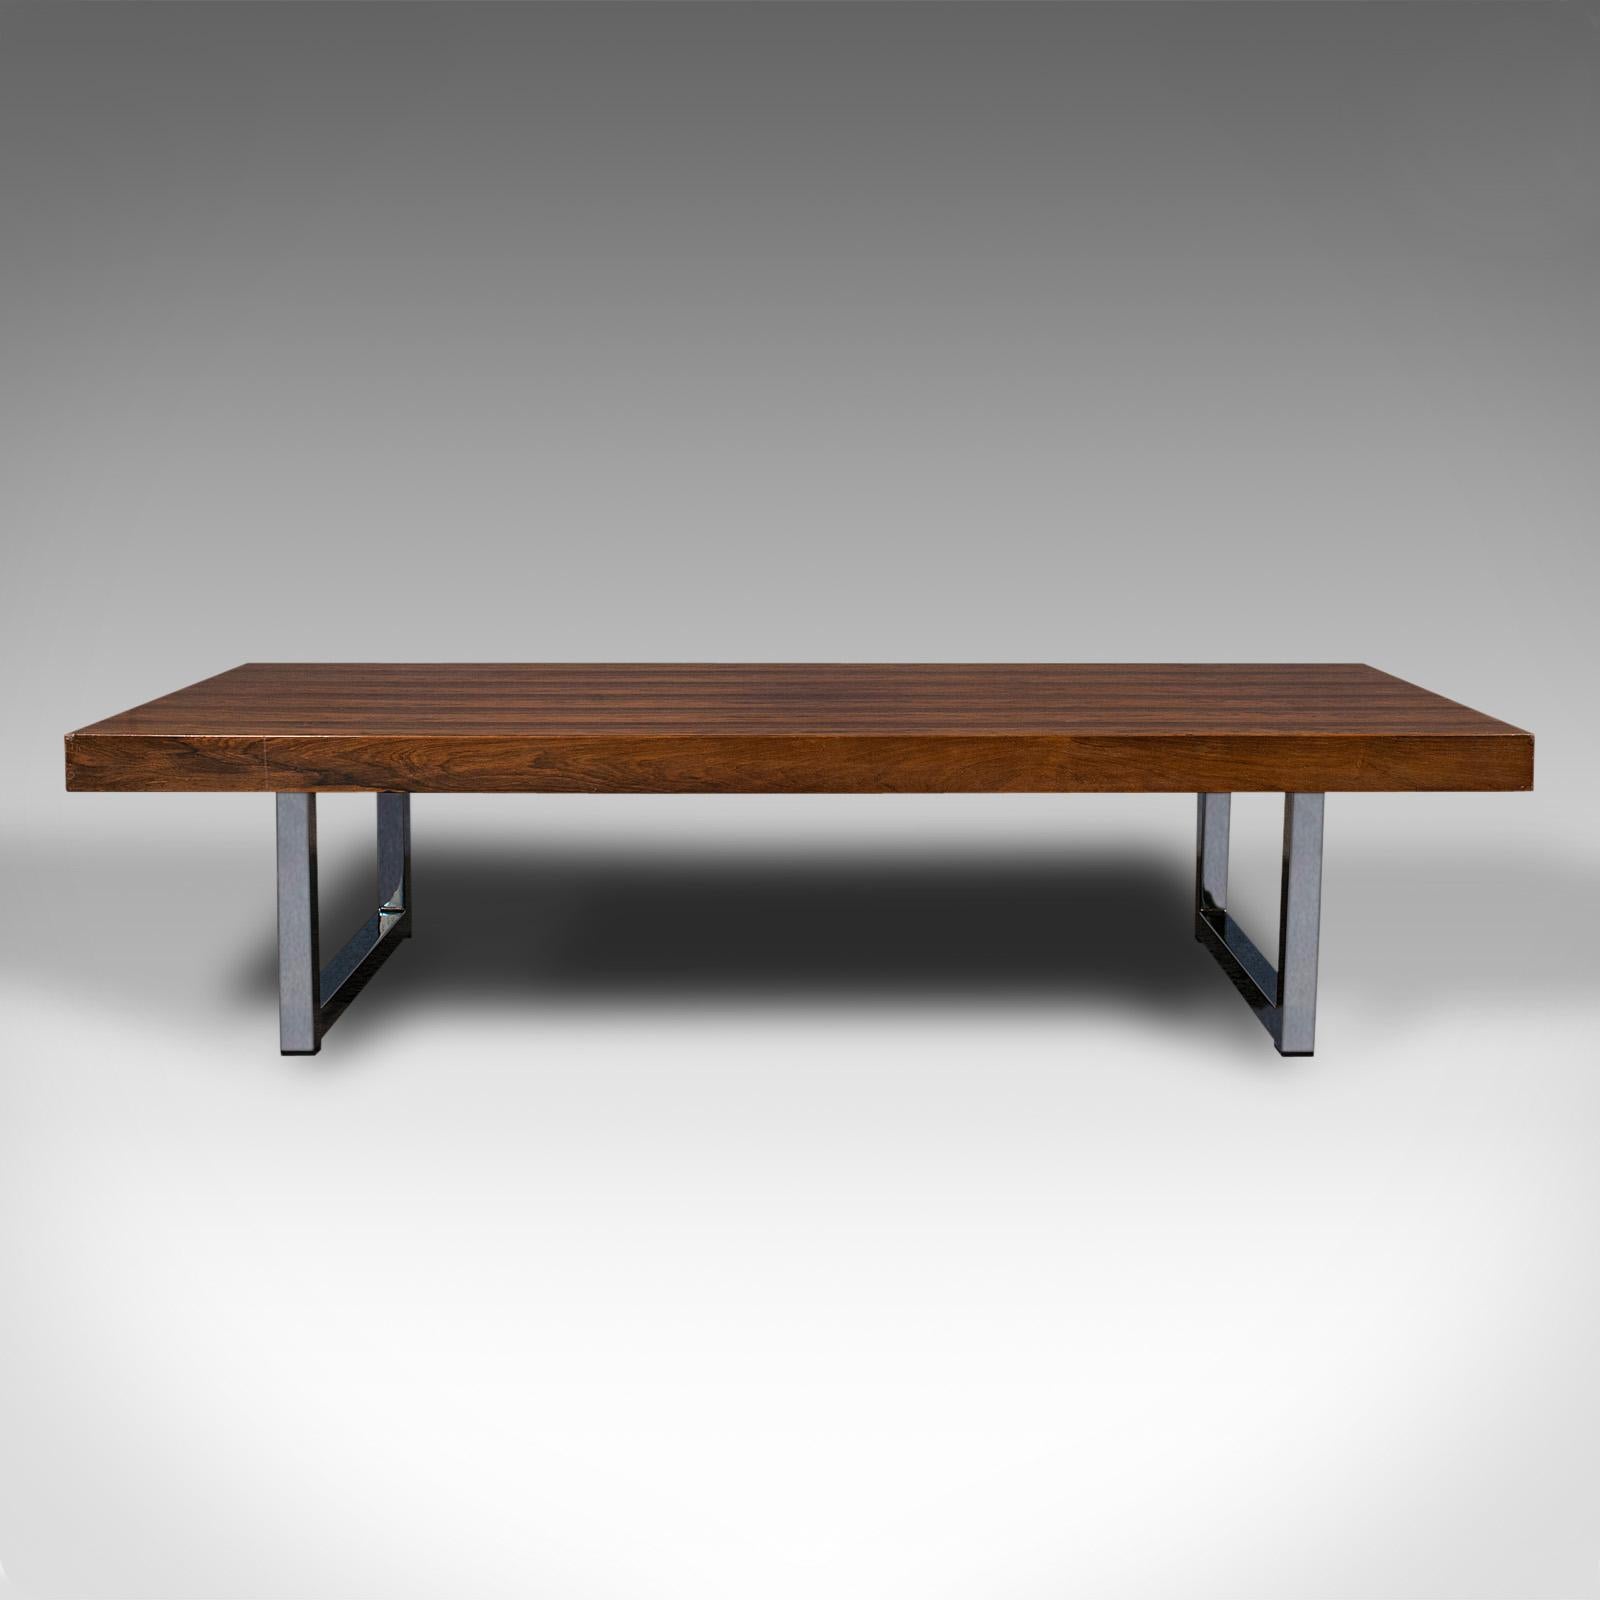 This is a quality vintage coffee table. An English, rosewood table with Danish influence, after Merrow Associates, dating to the mid 20th century, circa 1960.

Strikingly attractive example of sought-after, mid century furniture
Displays a